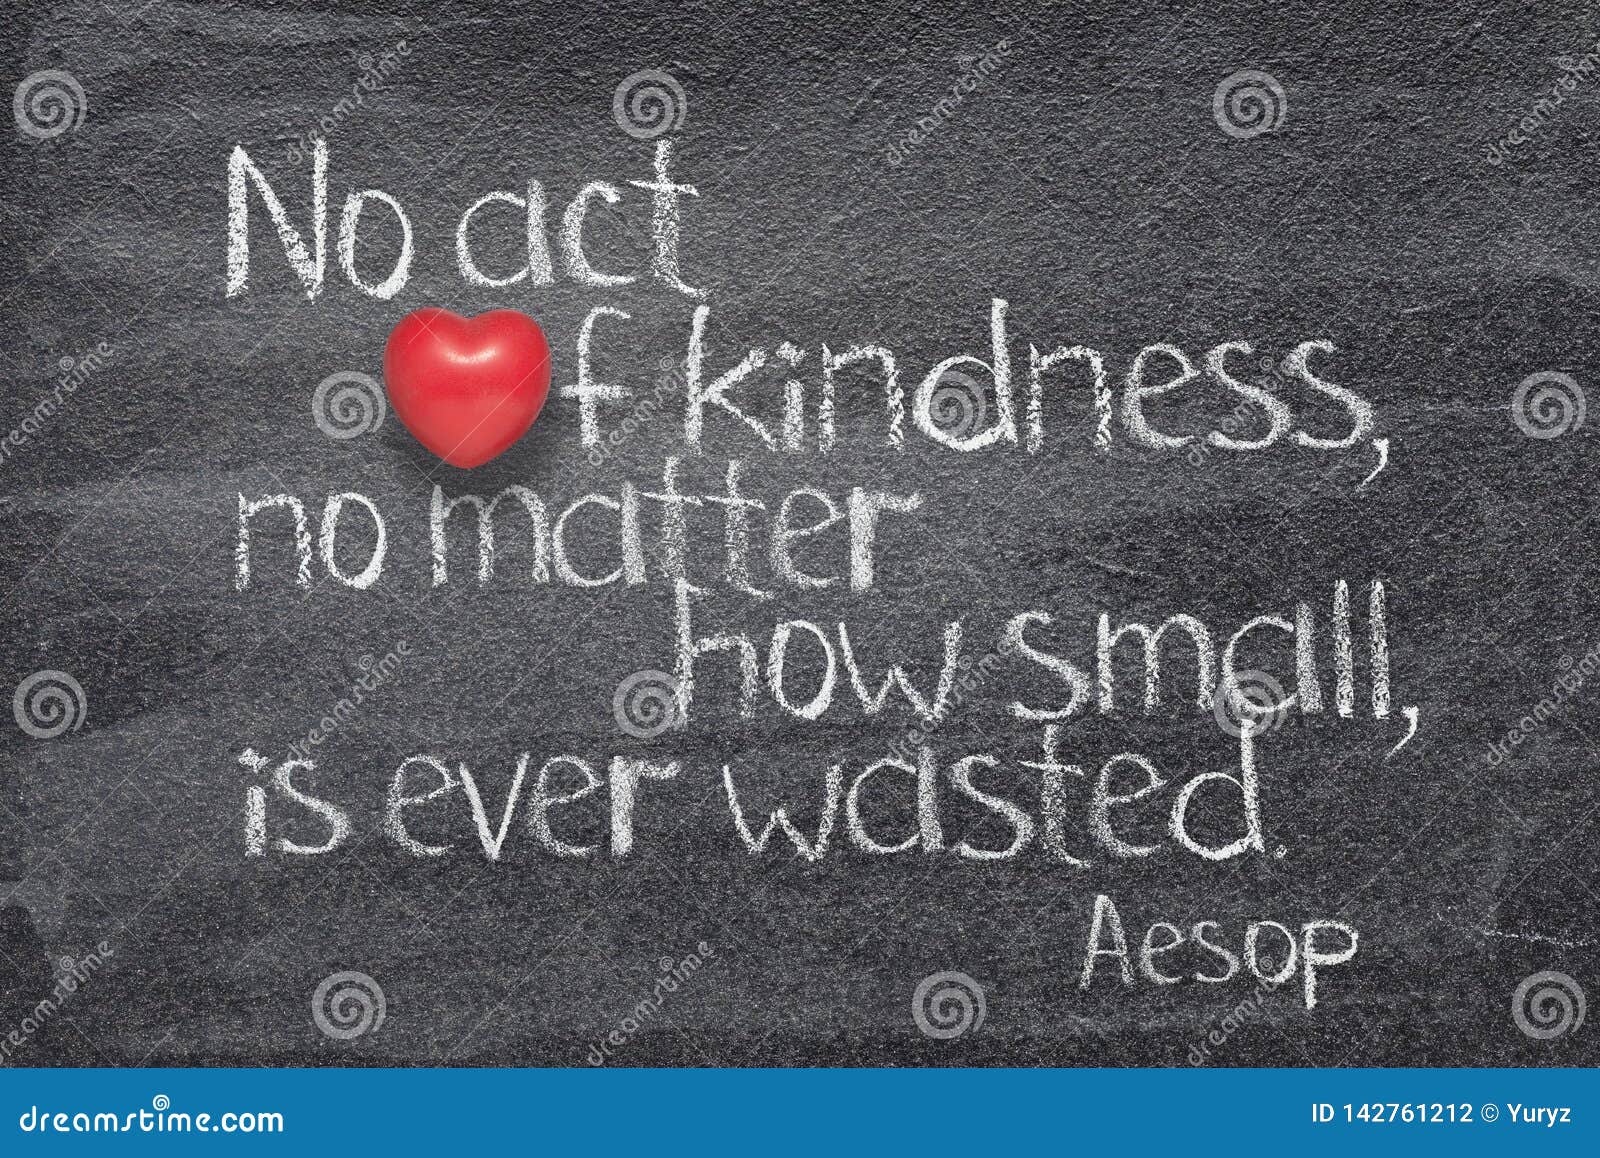 act kindness aesop